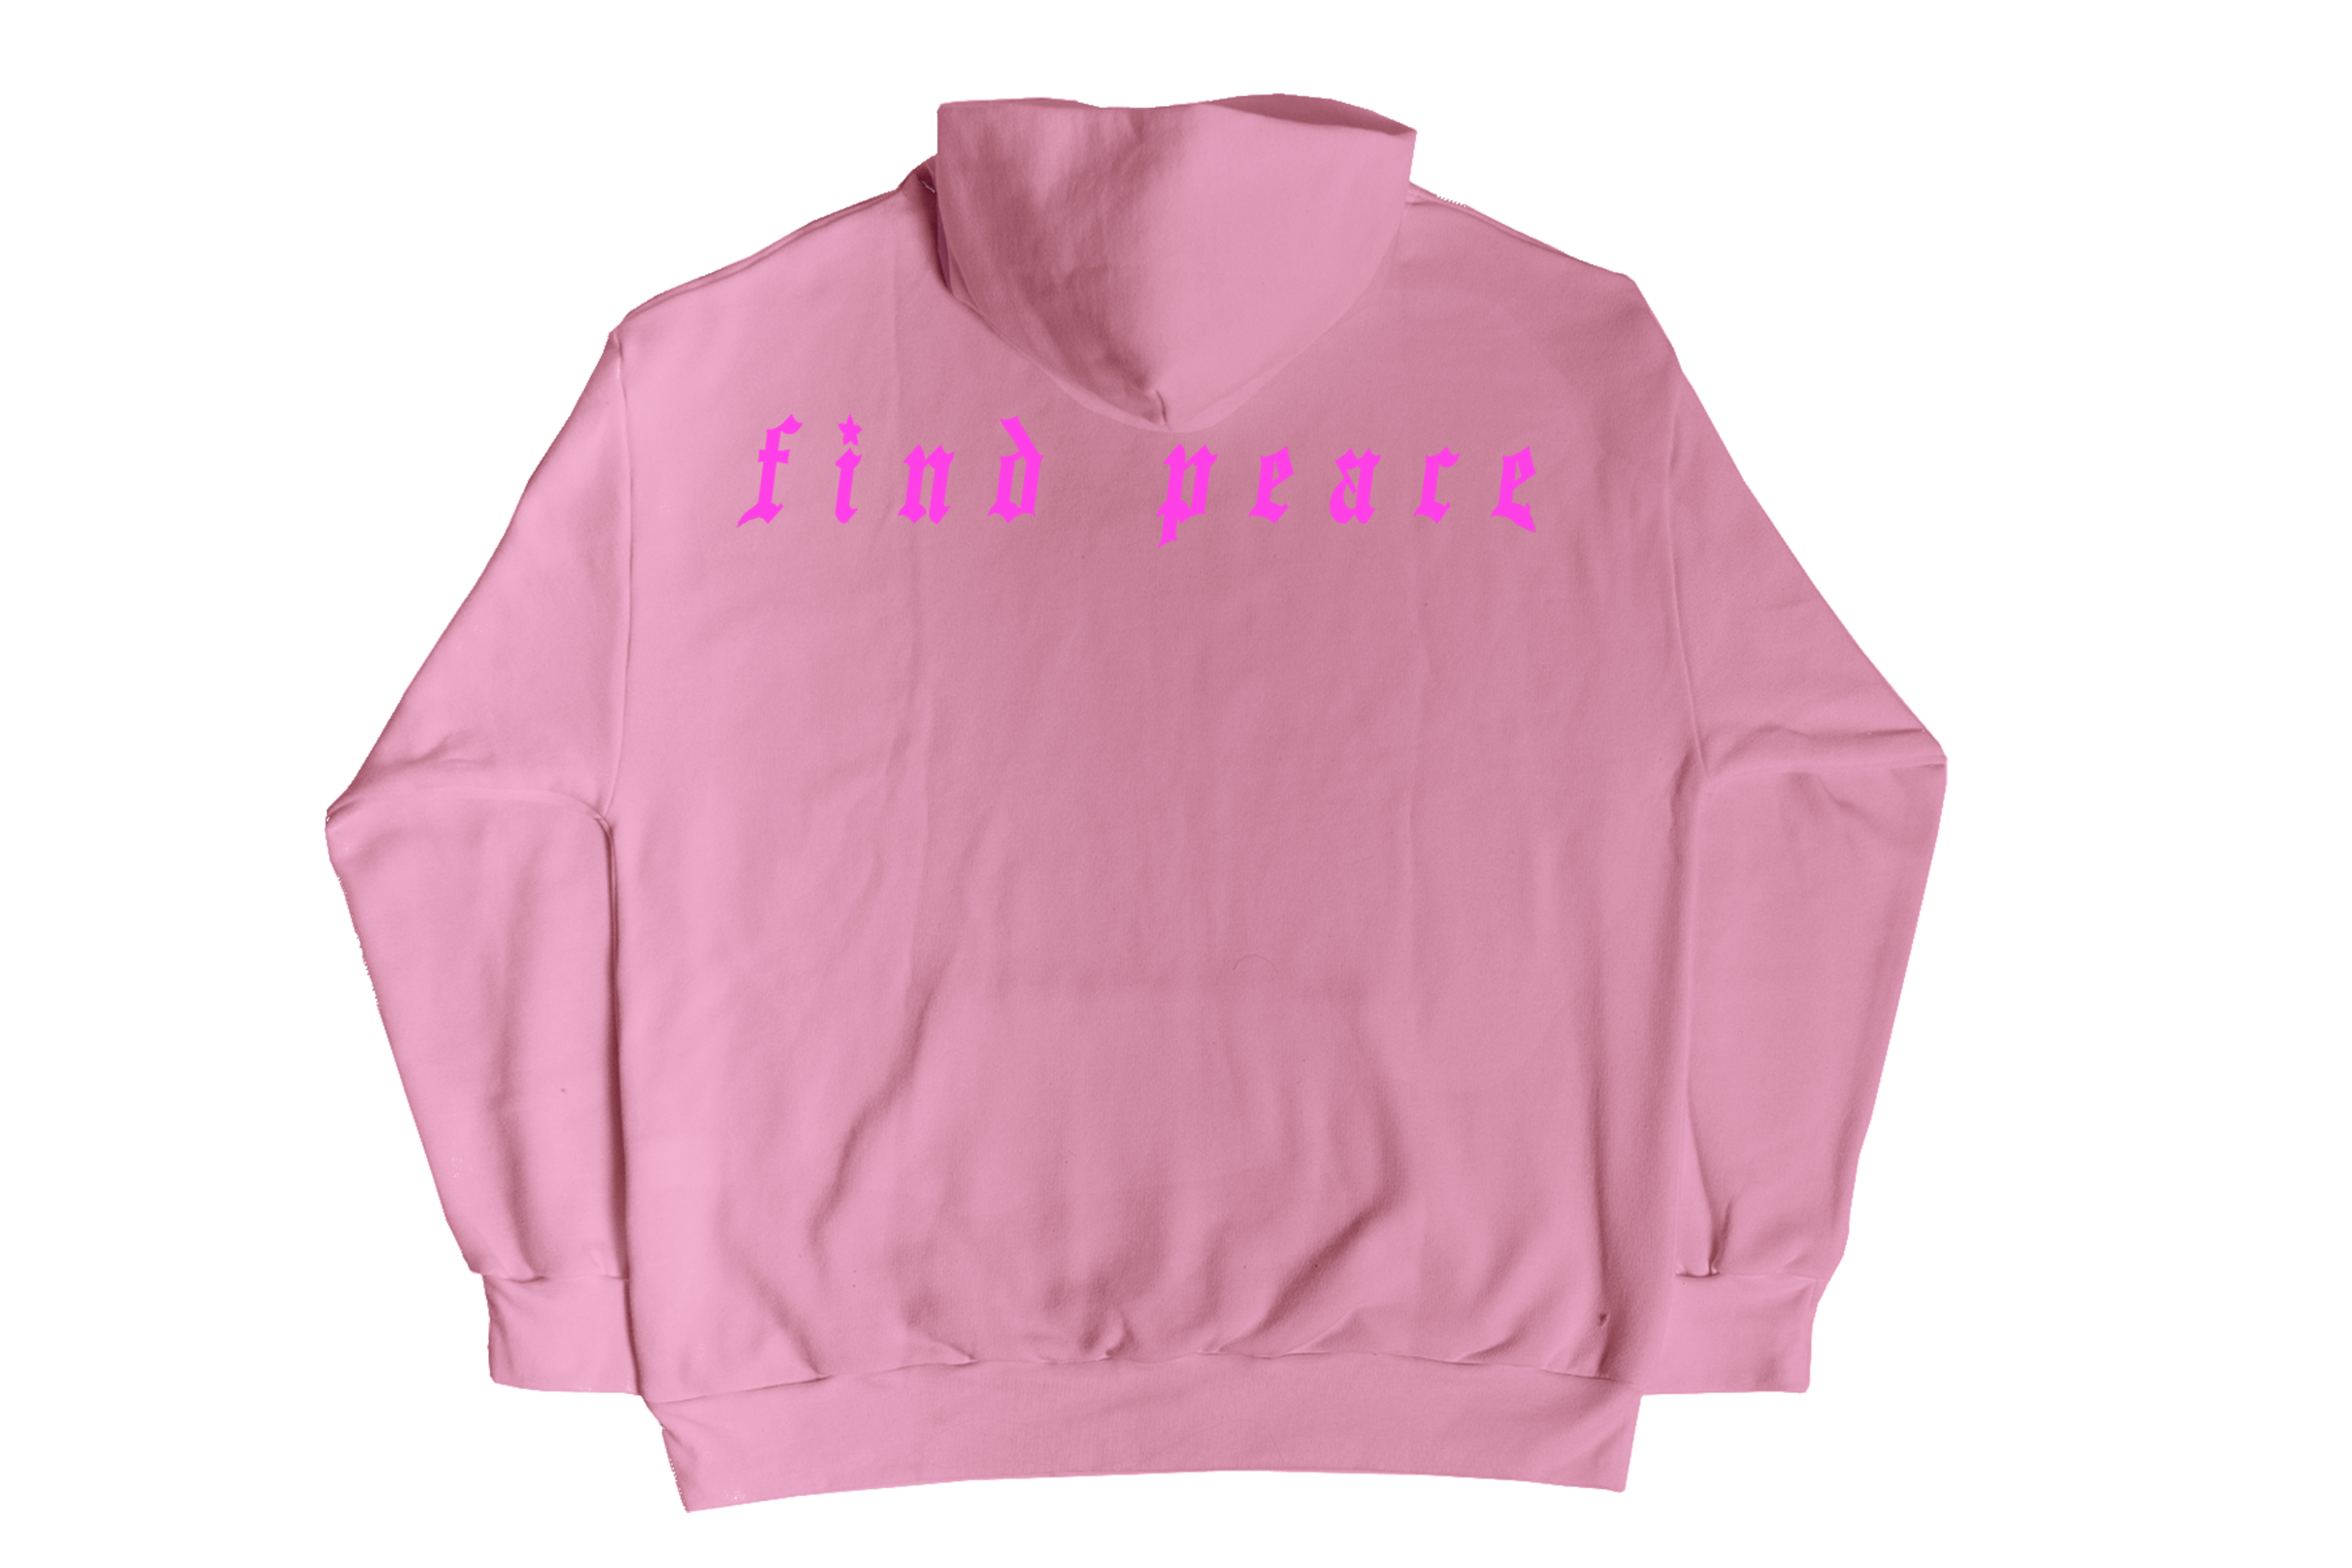 "Find Peace" Zip-up - Pink